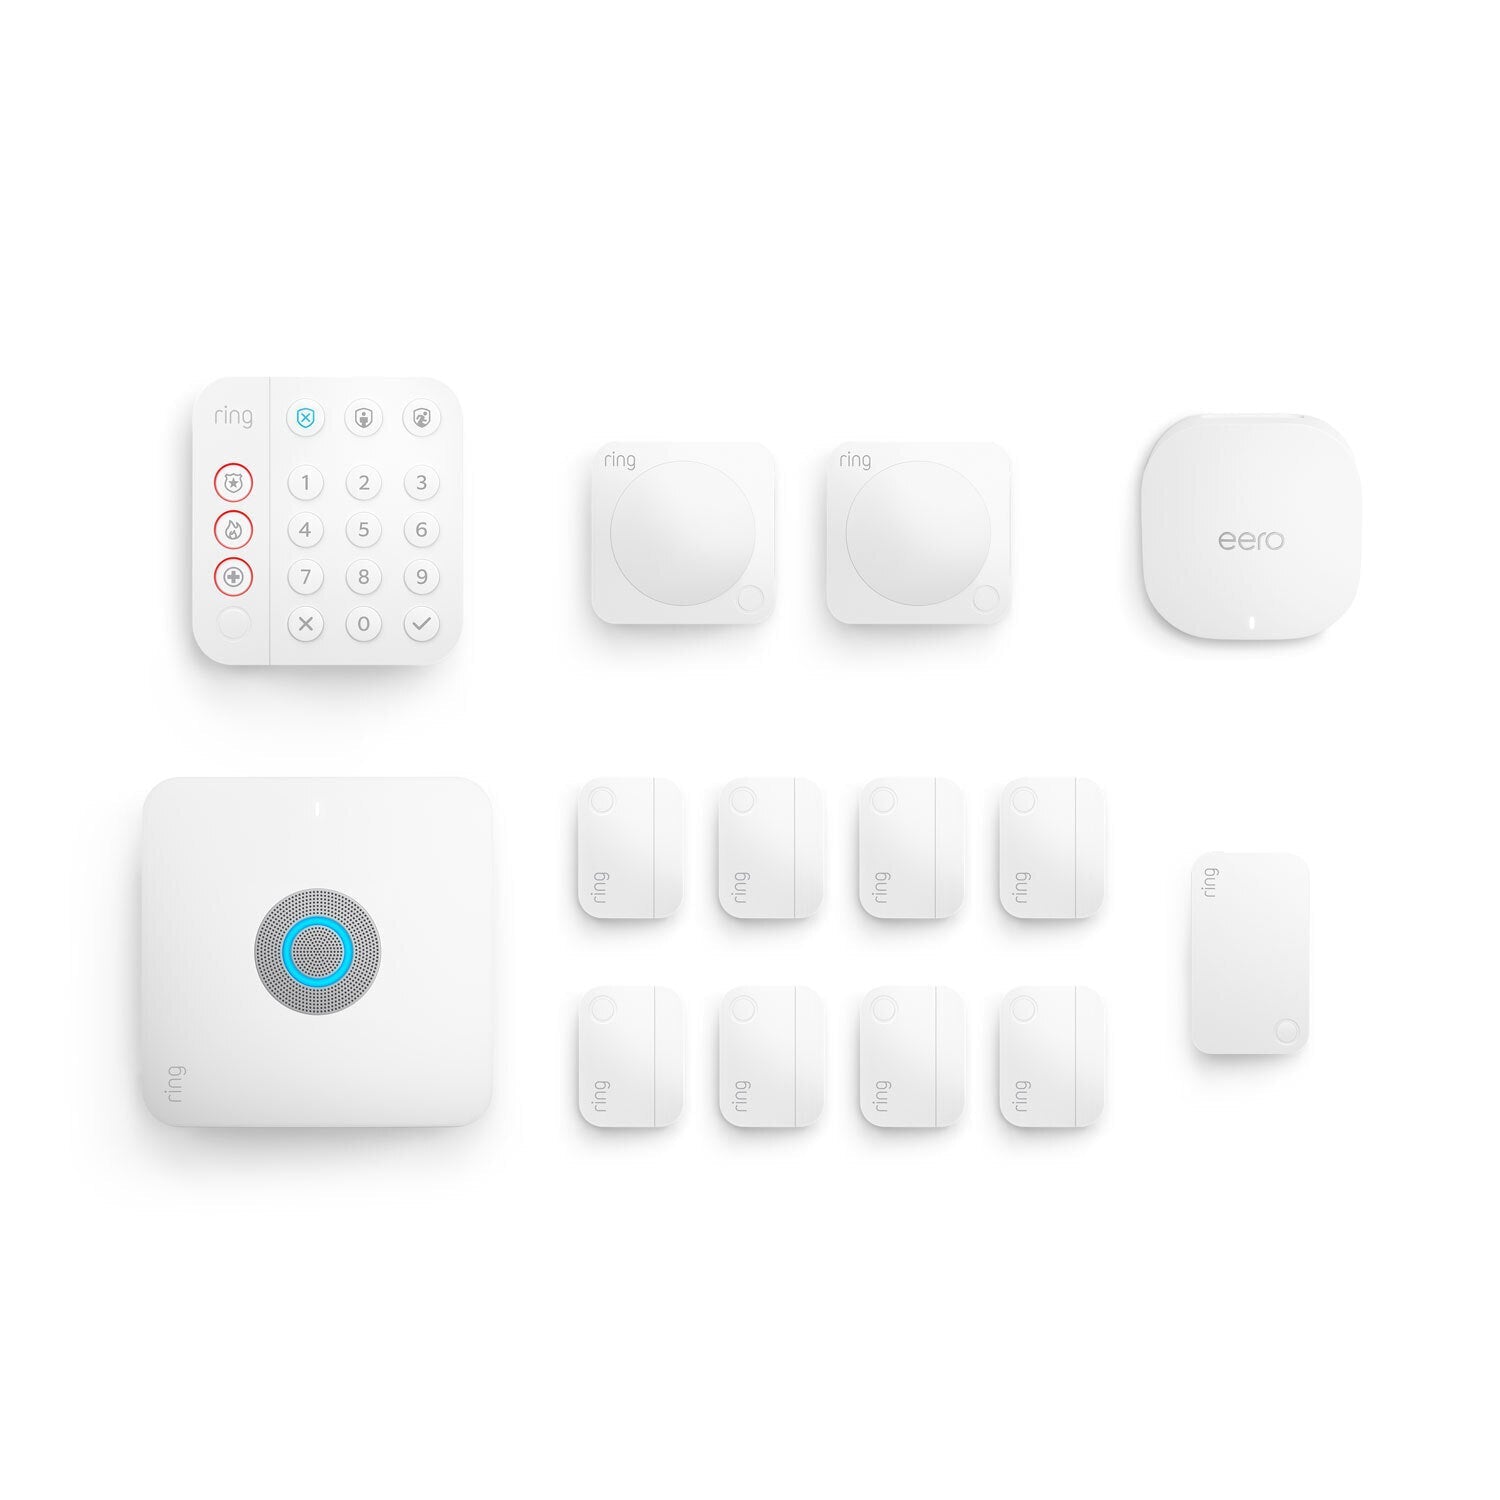 Alarm Pro, 13-Piece Kit (with built-in eero Wi-Fi 6 router and additional eero 6 Wi-Fi Router) - White:Alarm Pro, 13-Piece Kit (with built-in eero Wi-Fi 6 router and additional eero 6 Wi-Fi Router)